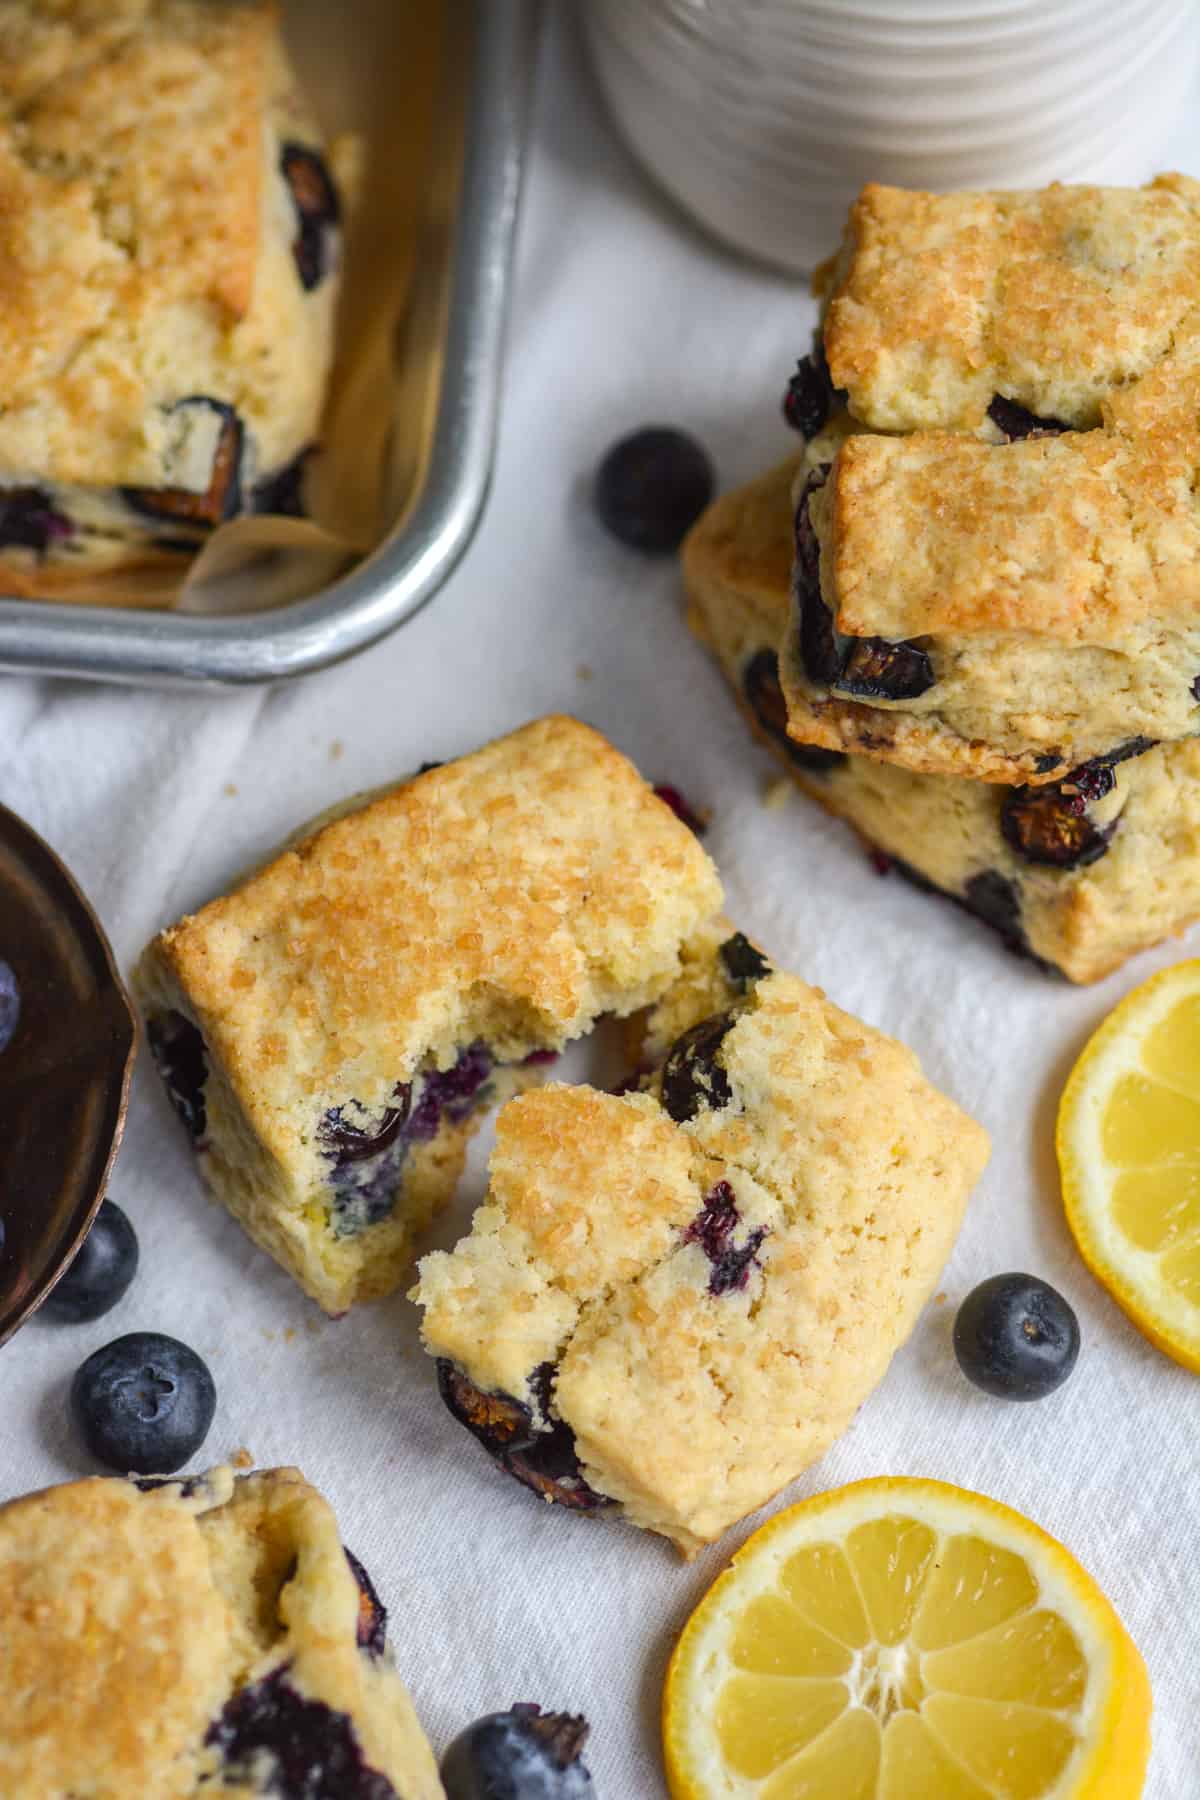 Vegan Blueberry scone broken in half on a surface with blueberries and lemon slices in the scene.